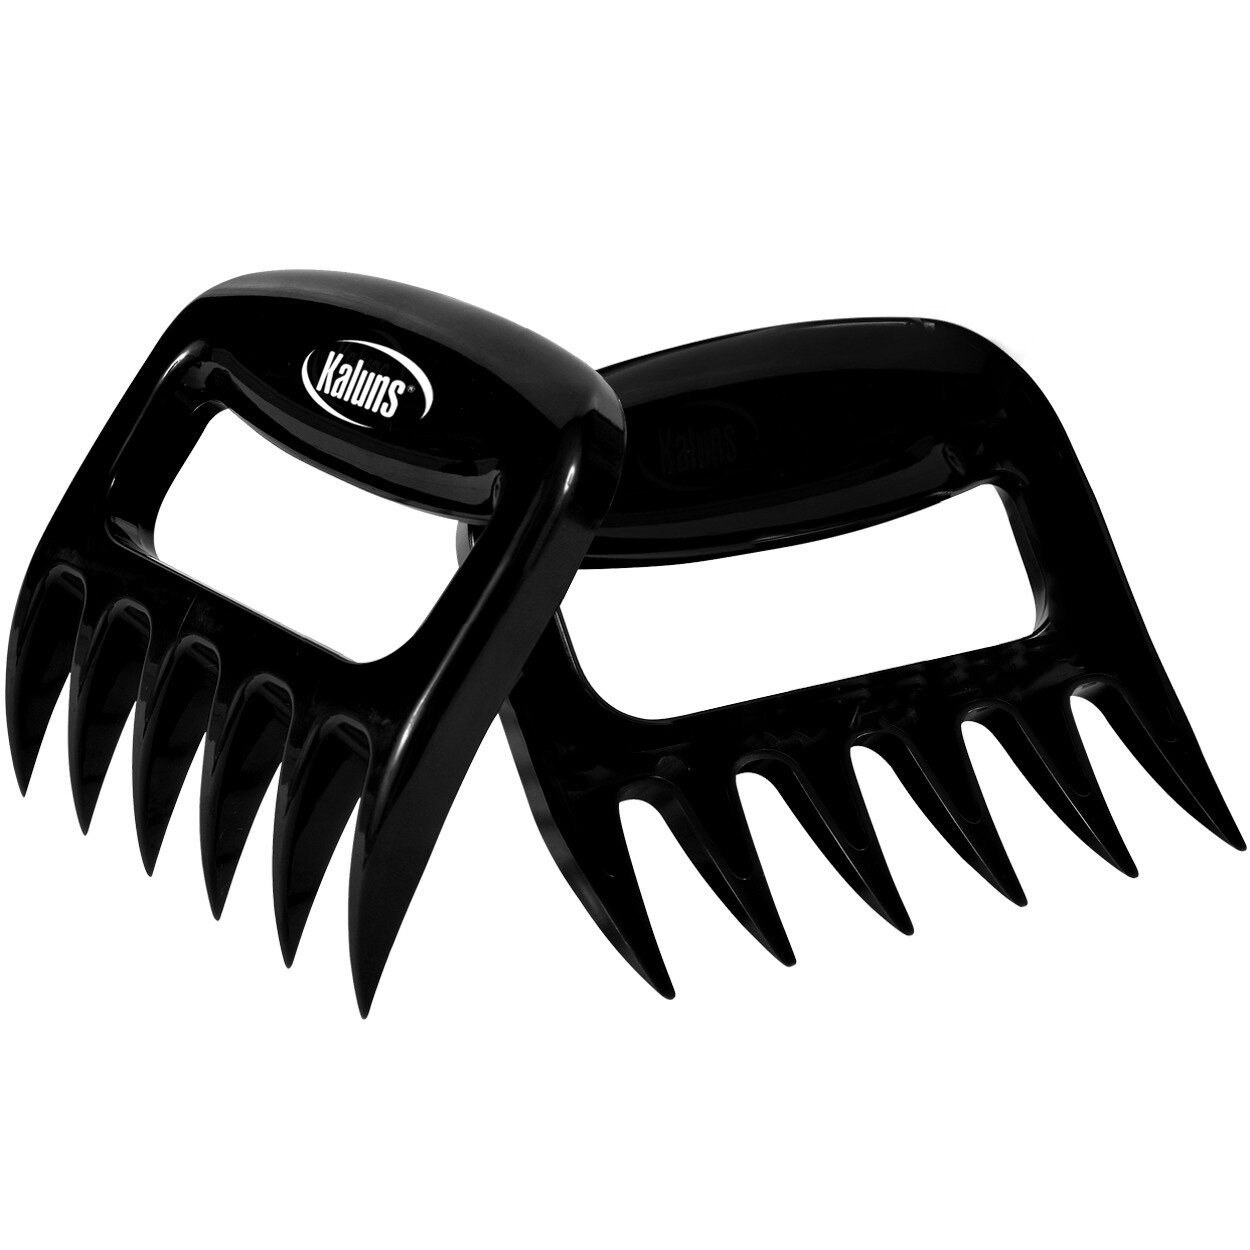 Rsvp Meat Claws (Set of 2)